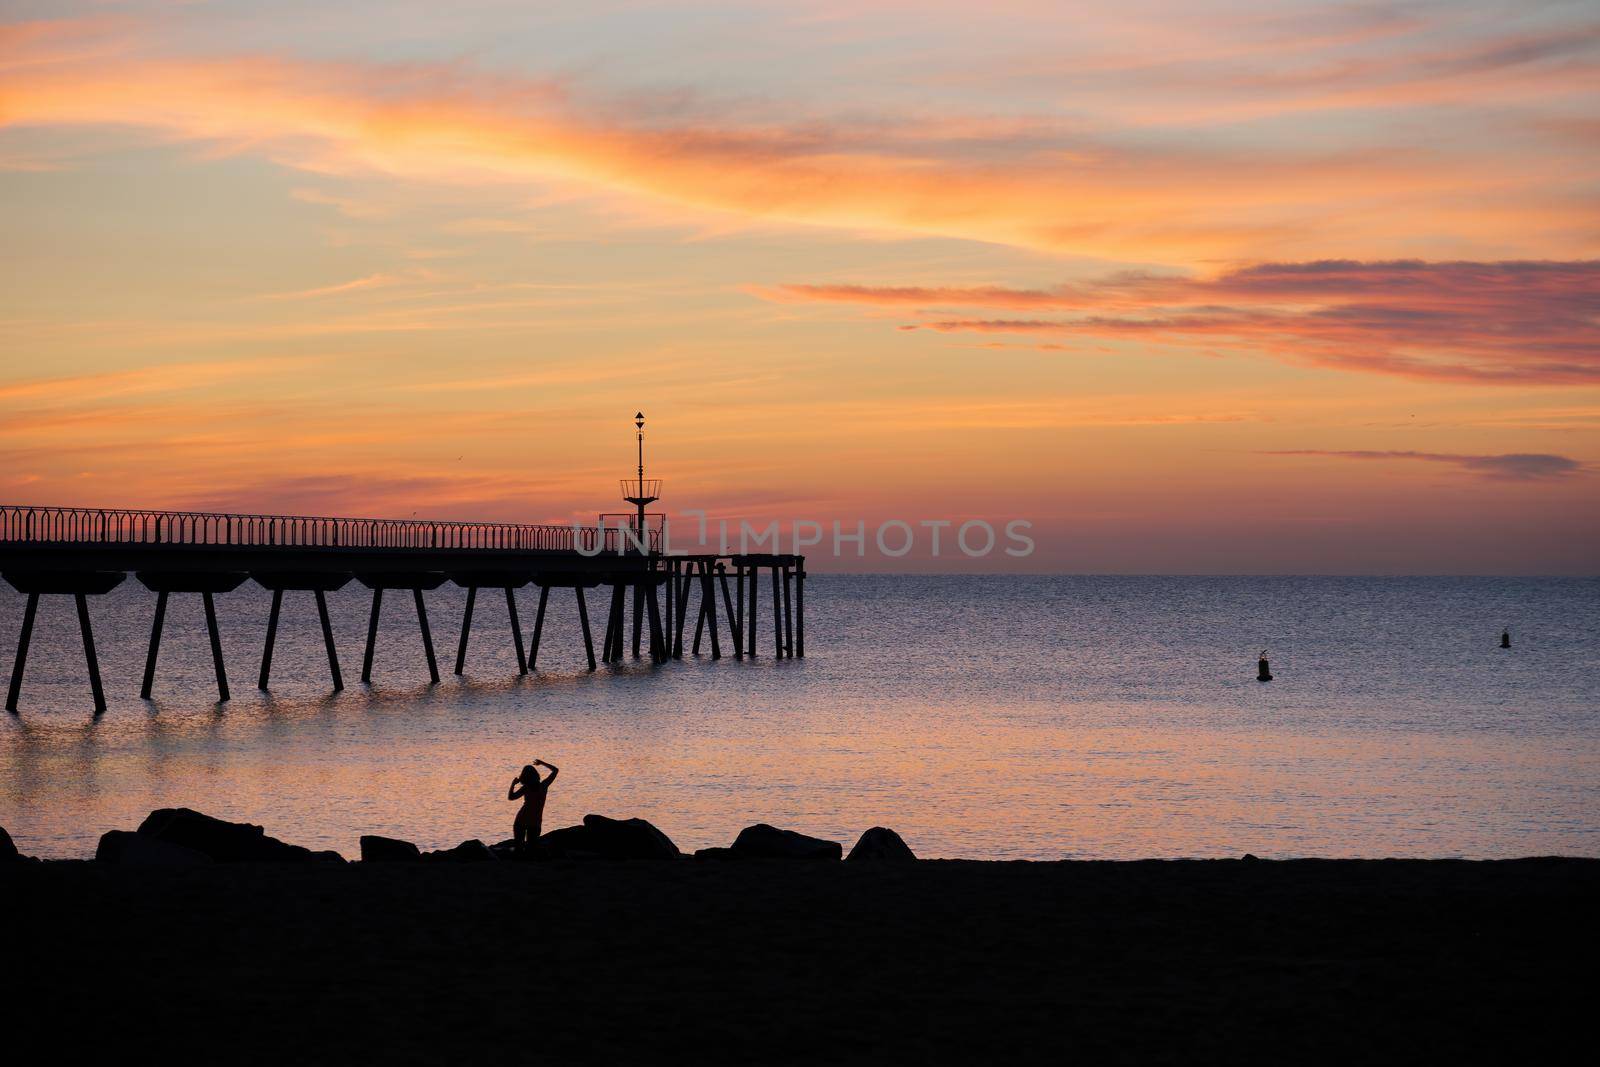 Sunrise in the mediterranean sea with view to the pontoon and silhouette of a woman dancing at the beach in the morning. Pont del Petroli, Badalona, Barcelona, Catalonia, Spain.